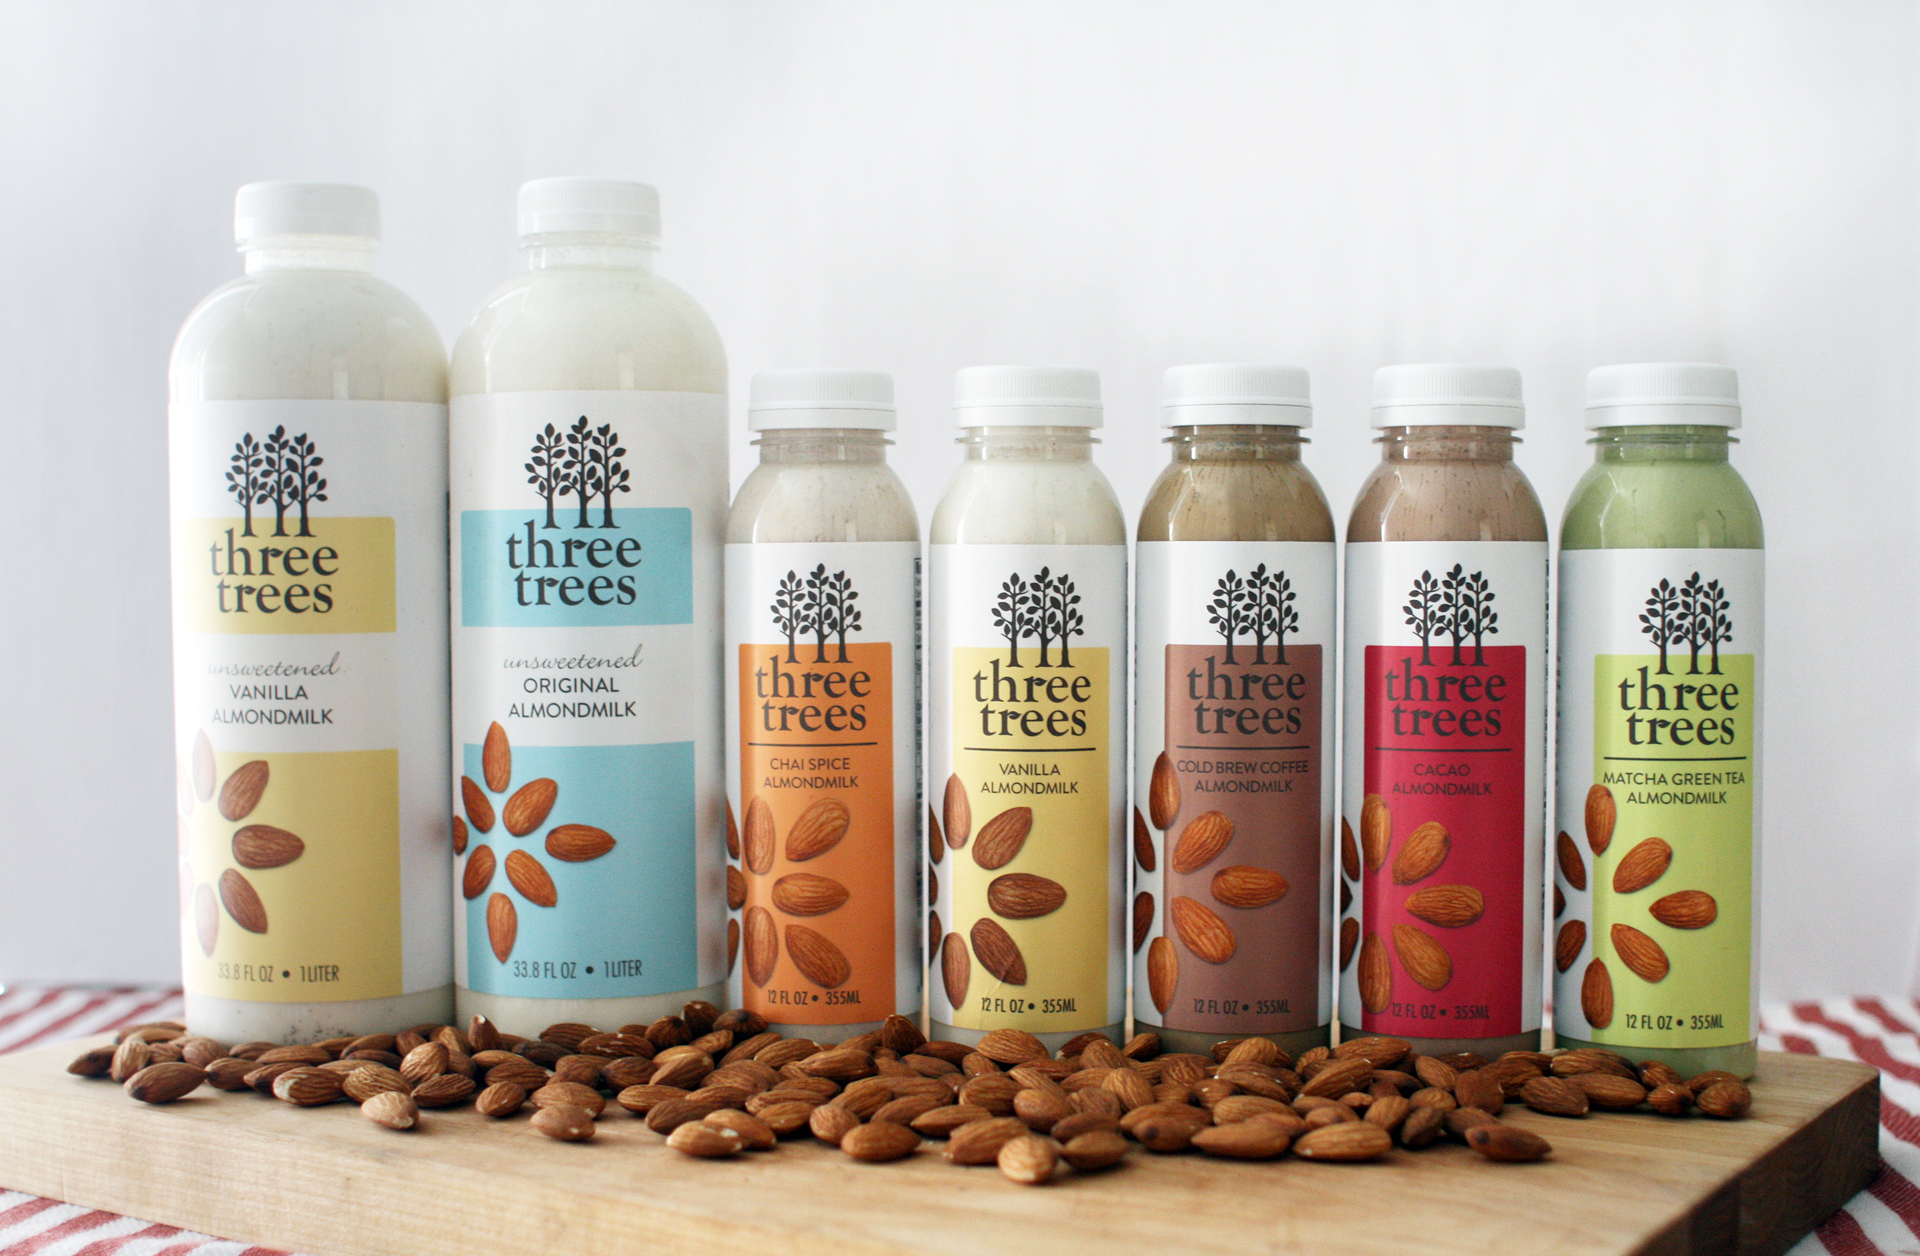 Three Trees offers a thicker almond milk and uses organic cane sugar as a sweetener, making it more of an indulgence.